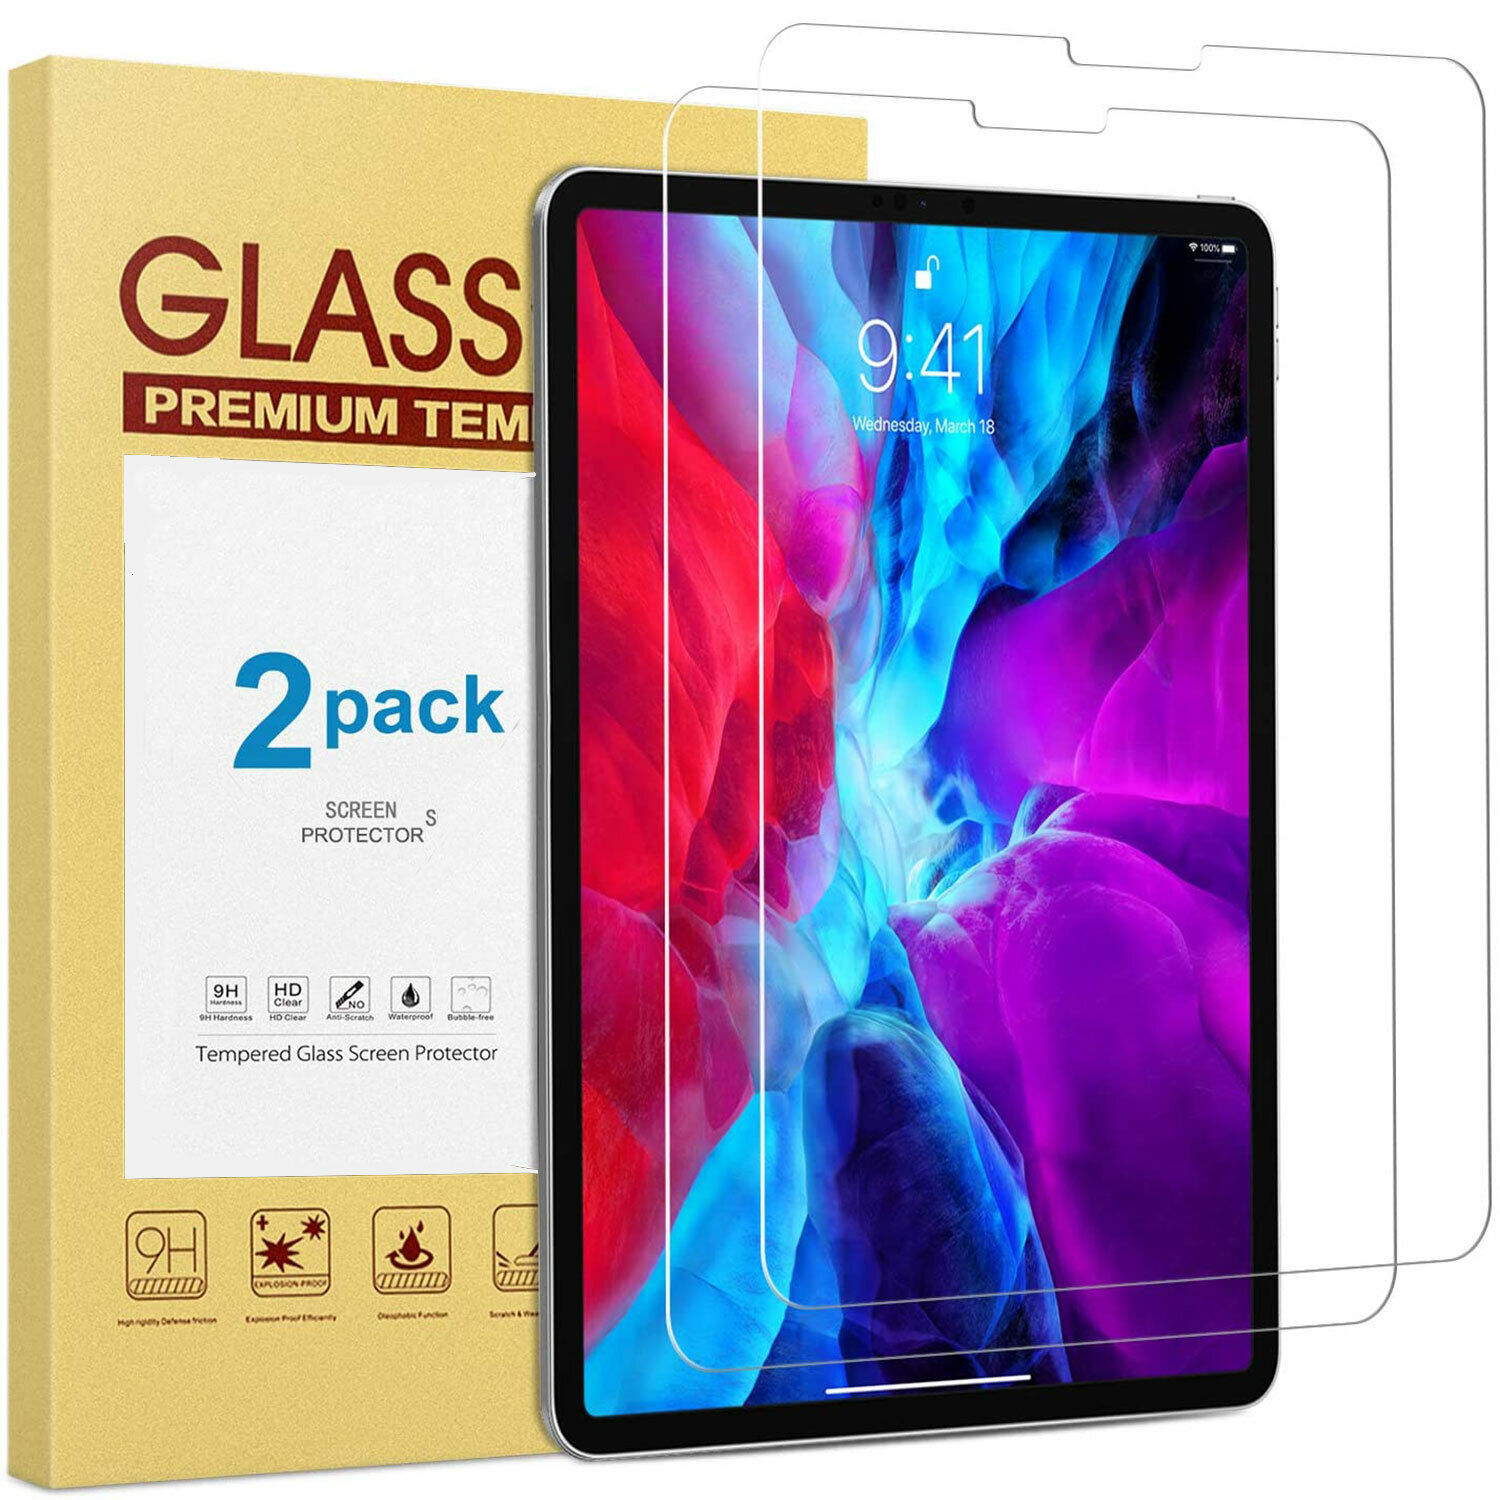 2 Pack Tempered Screen Protector For Apple iPad 9.7/10.2/10.5/10.9/11/12.9